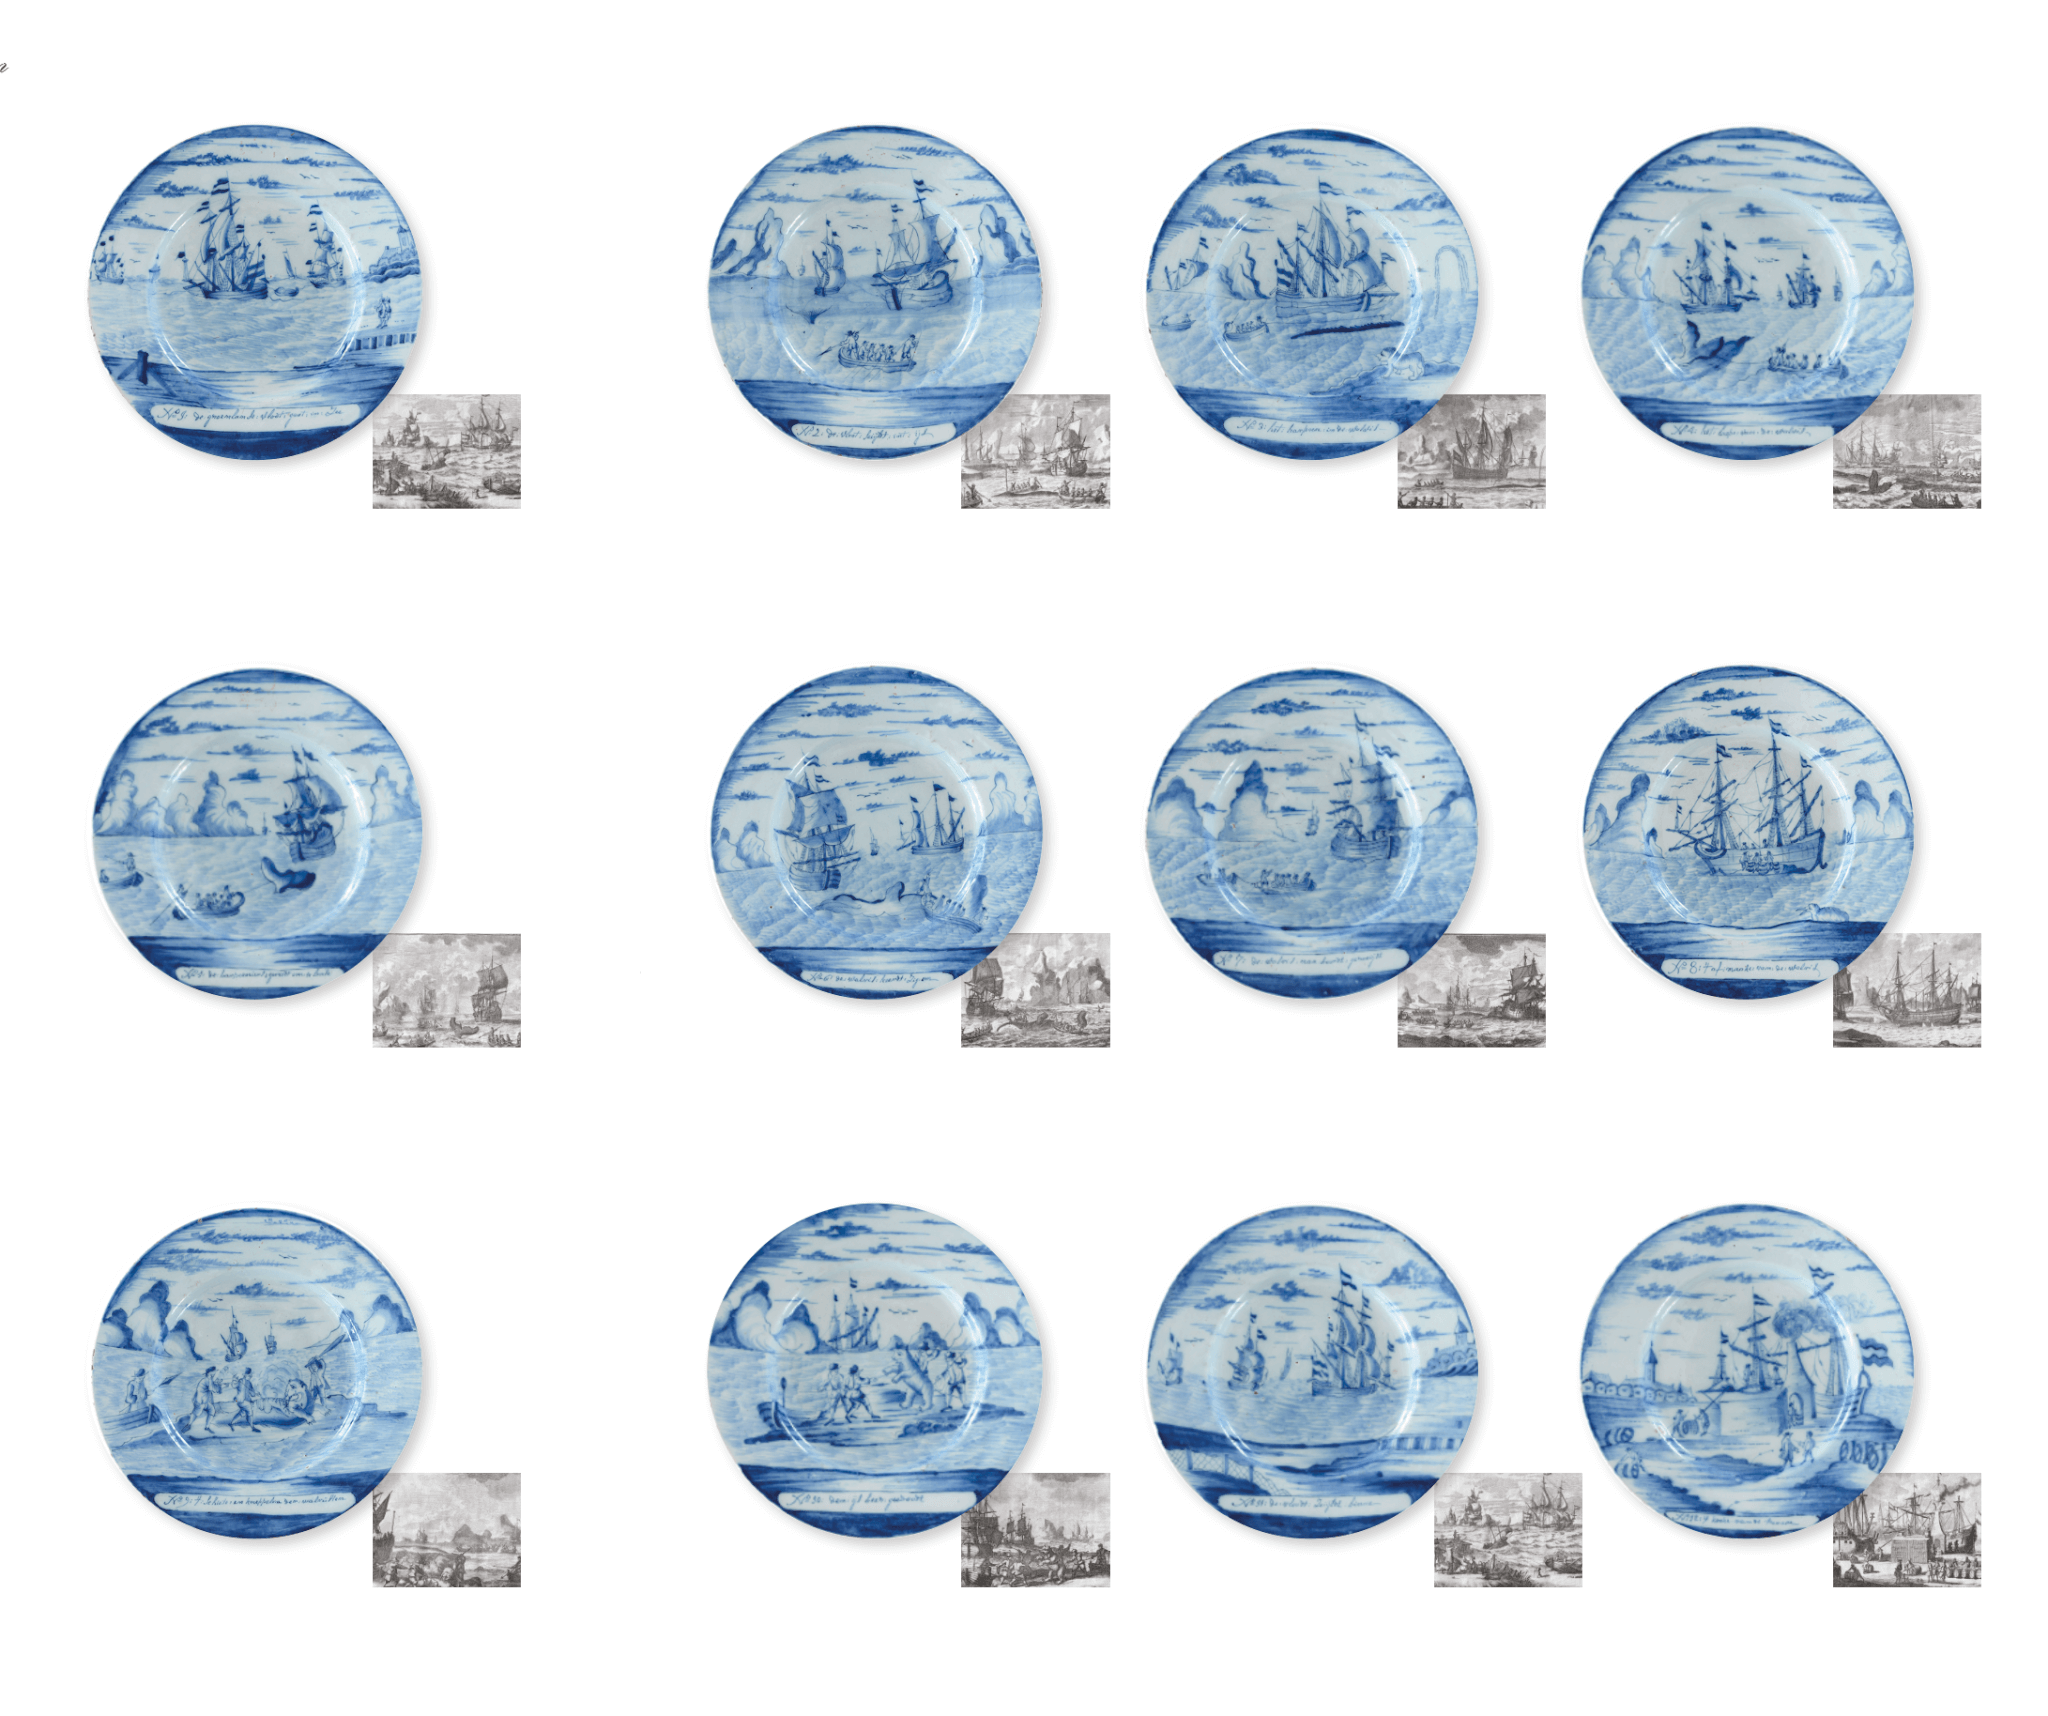 Blue and white Delftware whaling plates